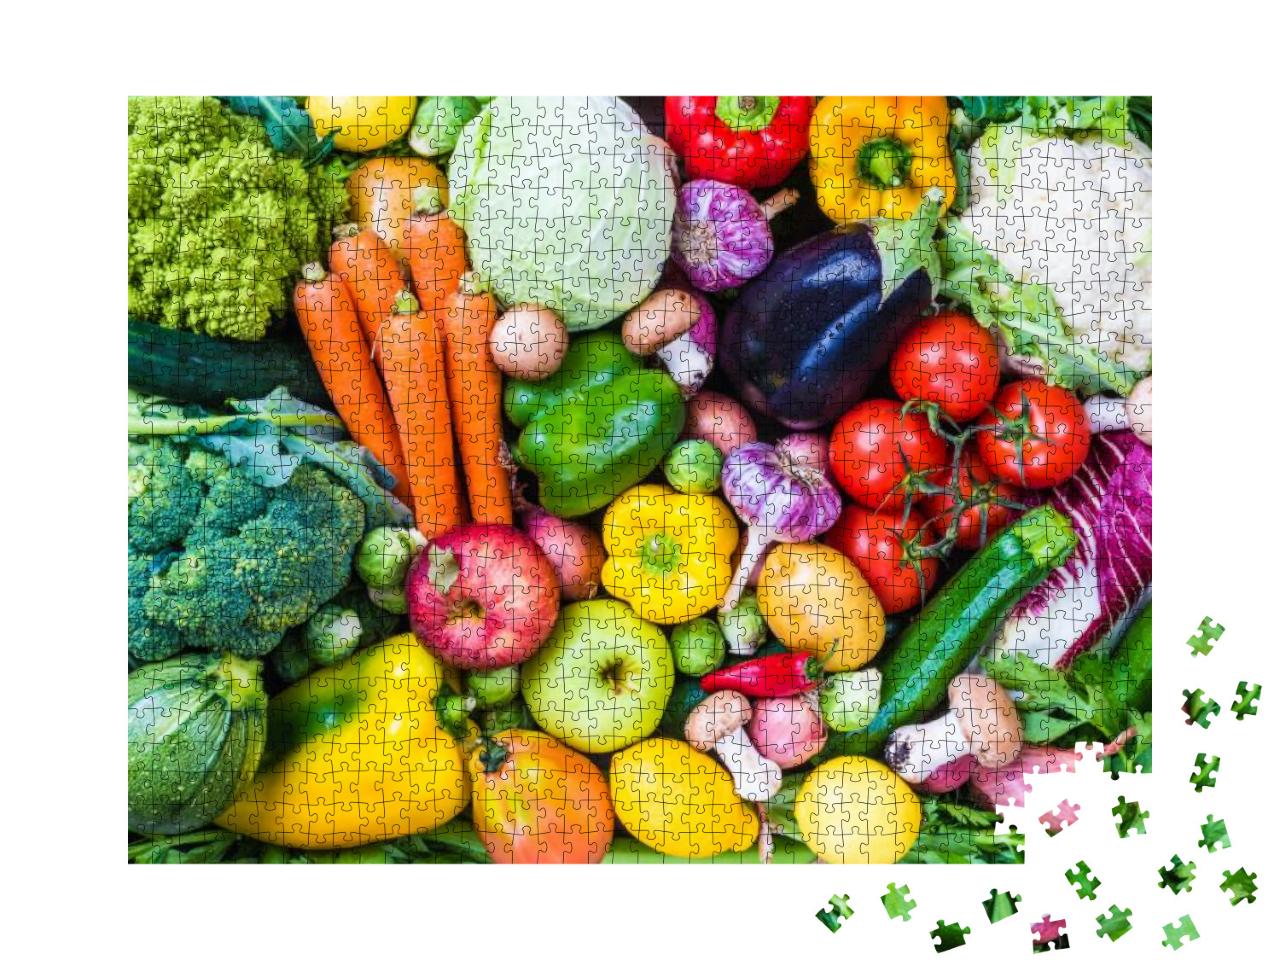 Raw Vegetables & Fruits Background. Healthy Organic Food... Jigsaw Puzzle with 1000 pieces